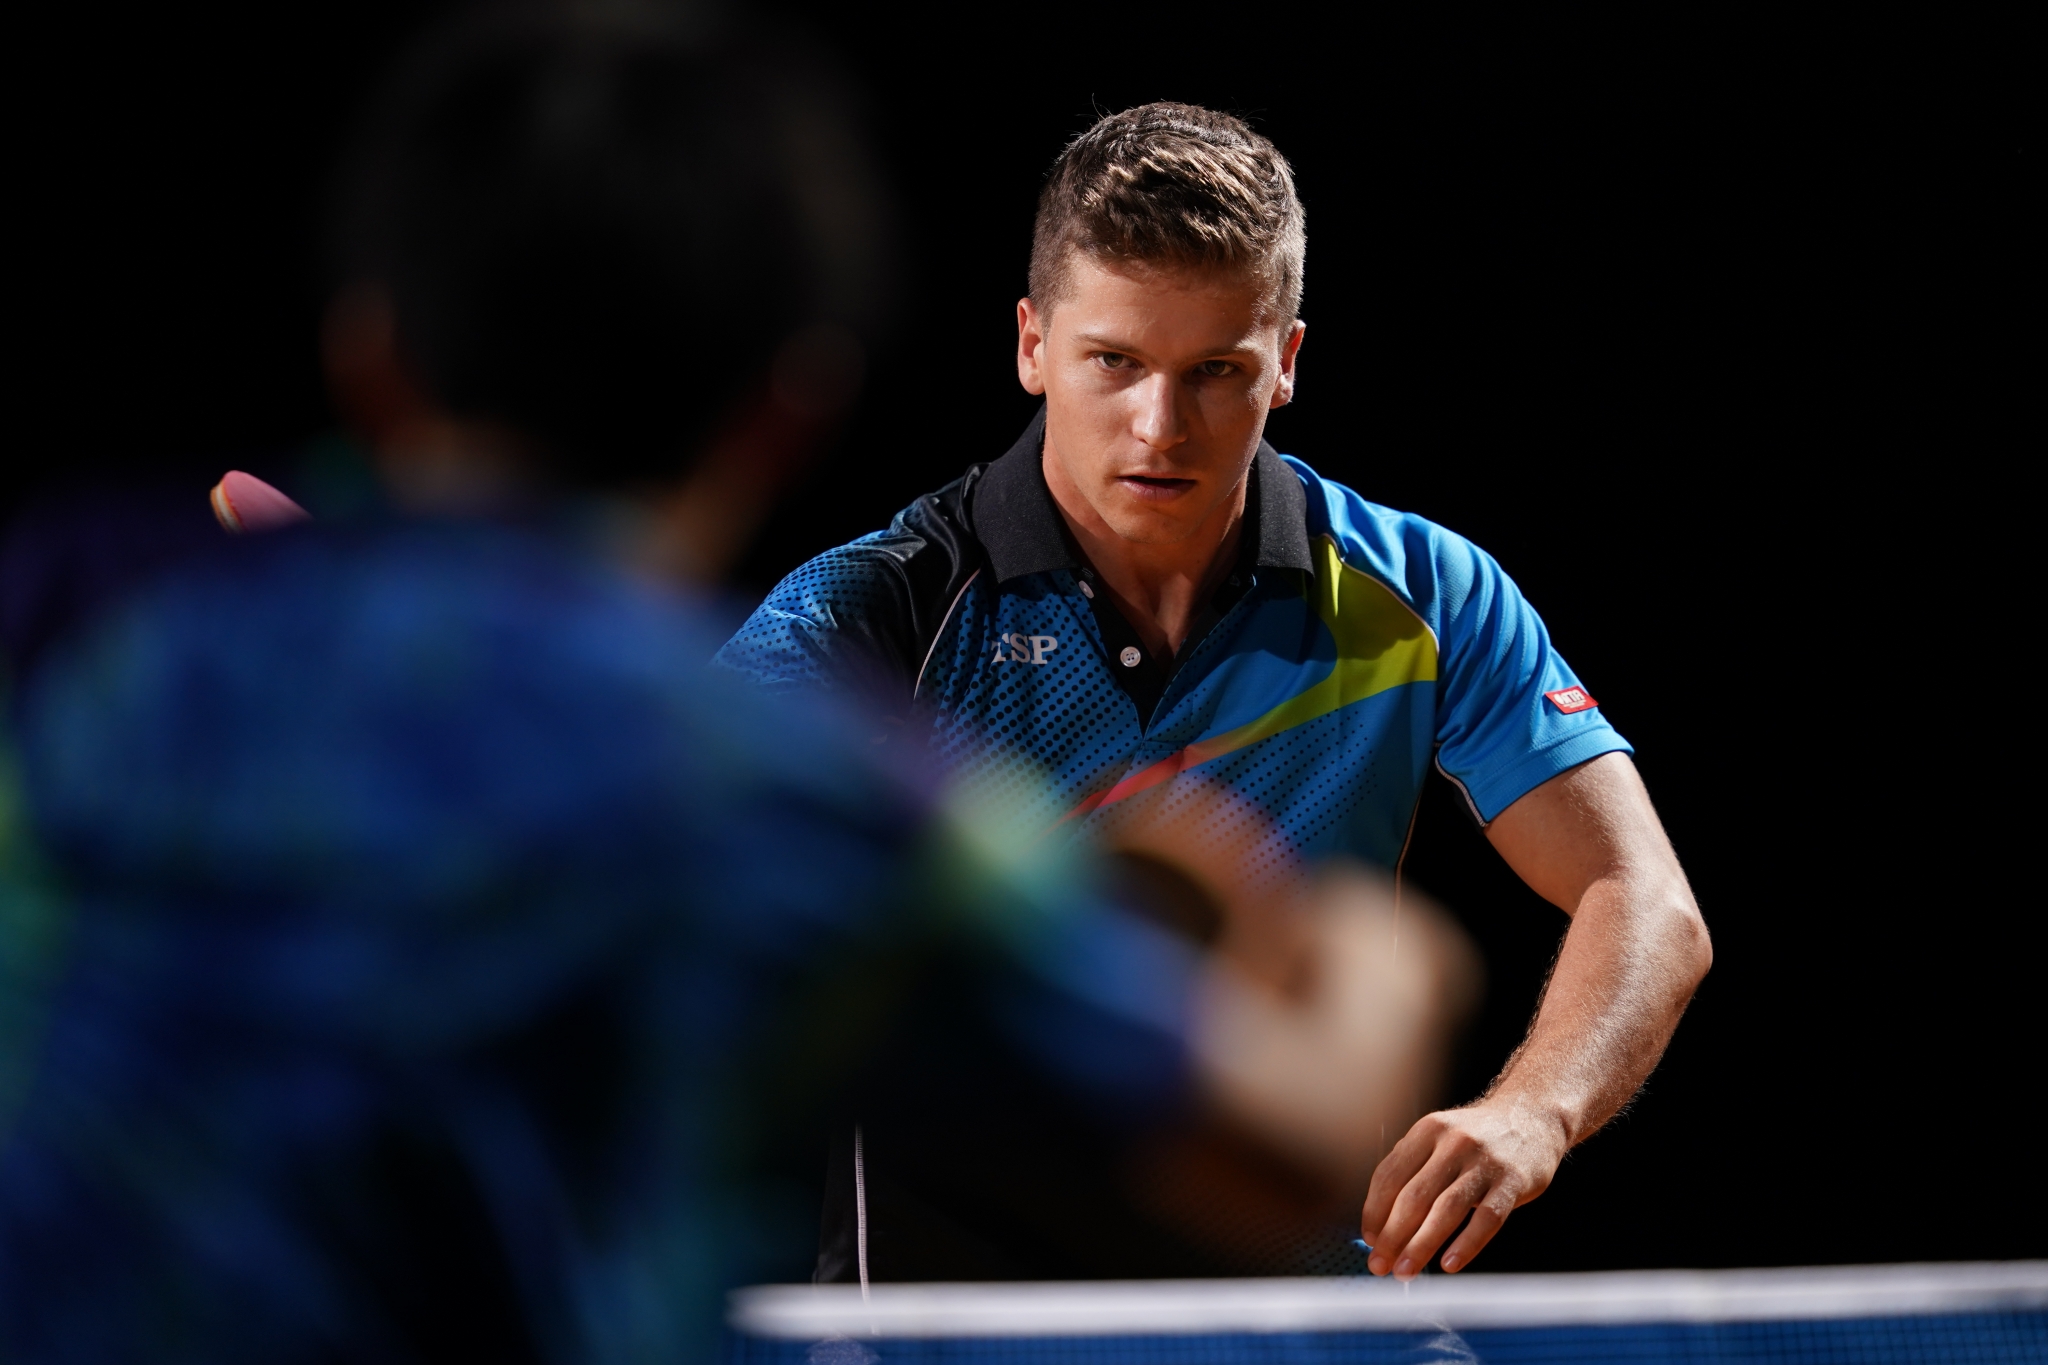 Table tennis player competing against an opponent in bokeh foreground